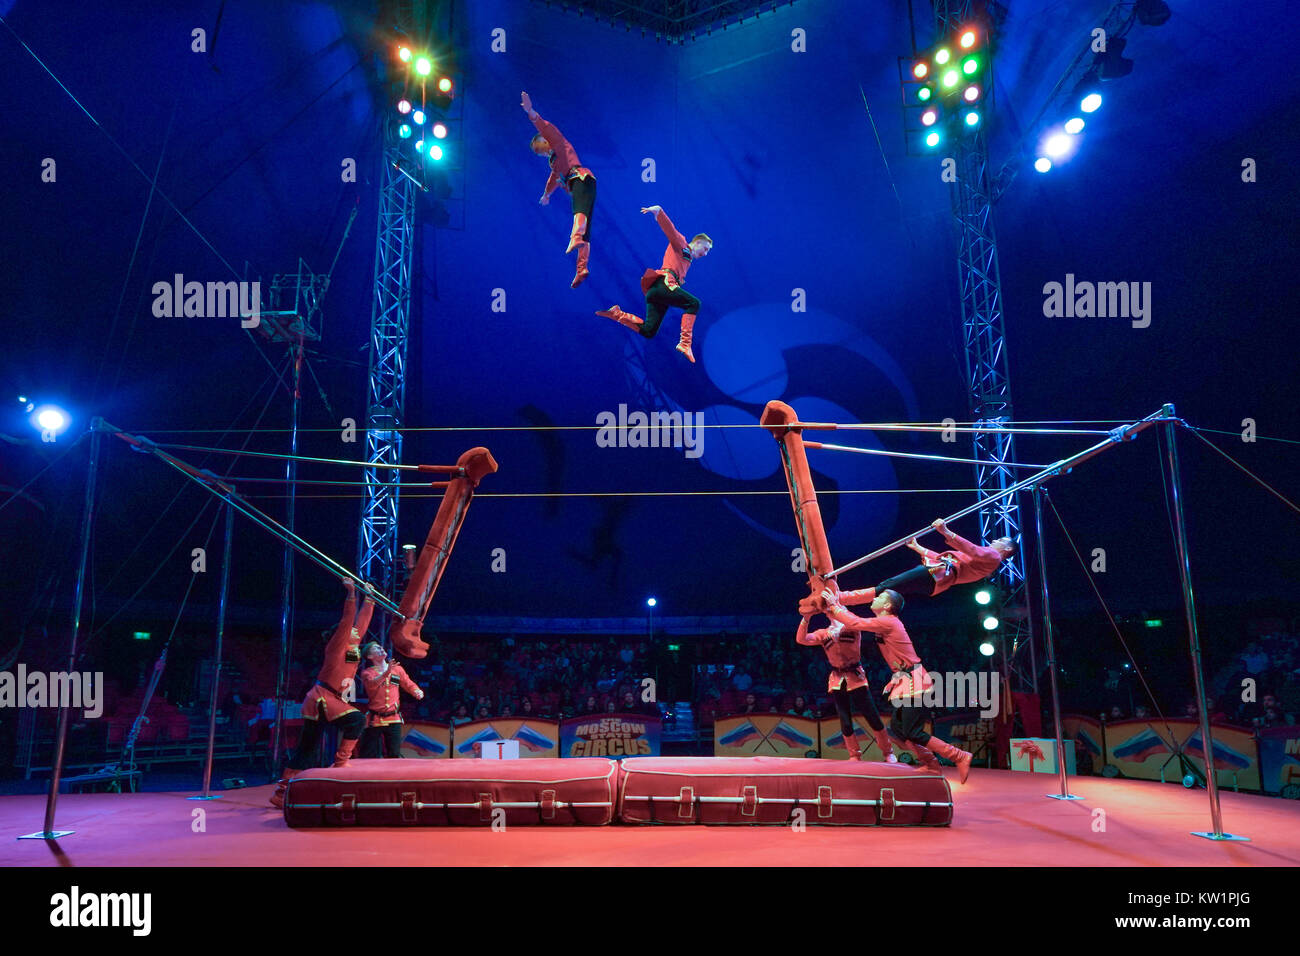 London, UK. 28th Dec, 2017. Acrobats of The Moscow State Circus under the big top in Ealing, London. Photo date: Thursday, December 28, 2017. Credit: Roger Garfield/Alamy Live News Stock Photo